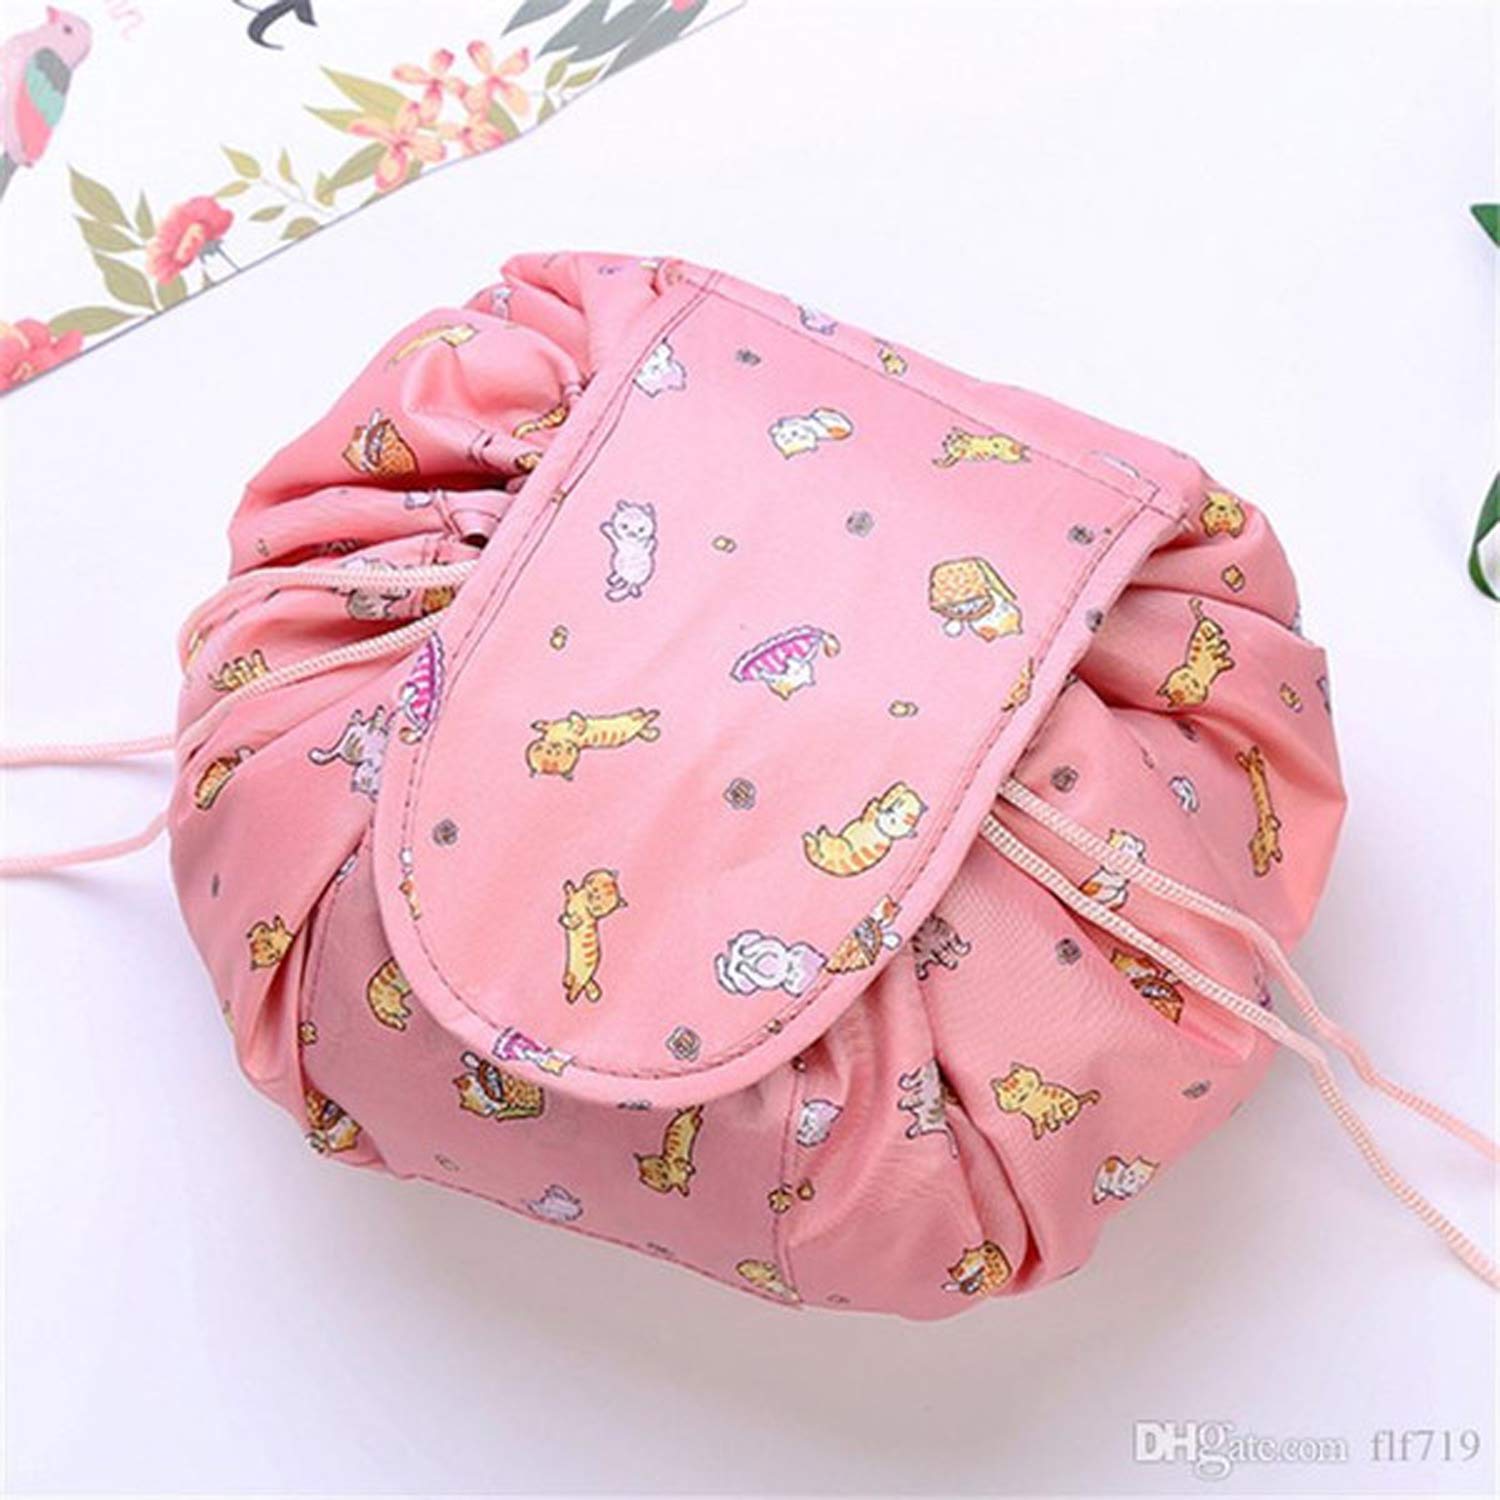 HOUSE OF QUIRK Lazy Cosmetic Bag Drawstring Travel Makeup Bag Pouch  Multifunction Storage Portable Toiletry Bags - Black